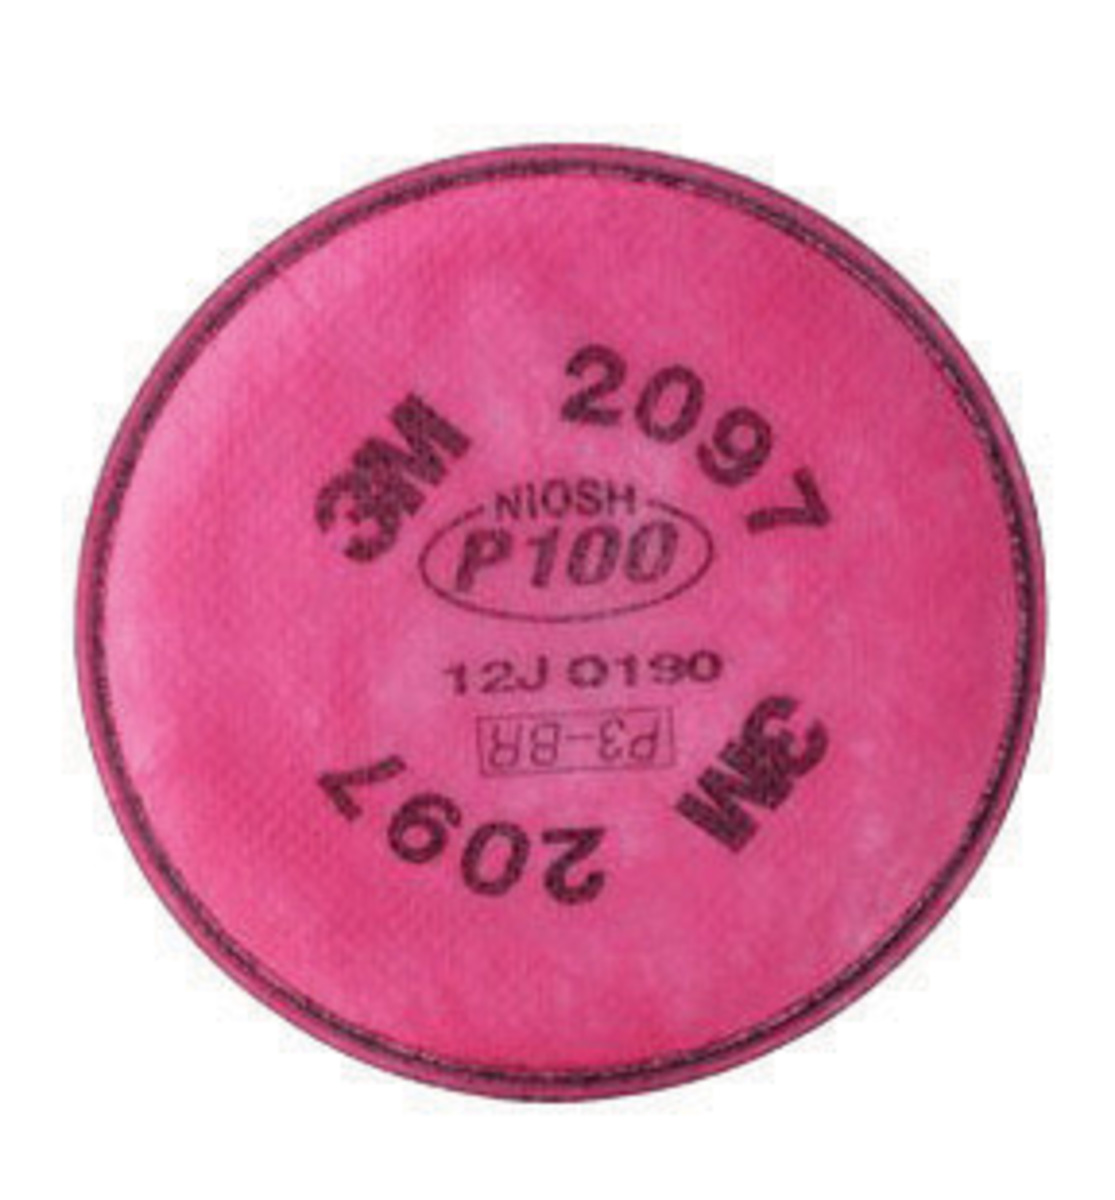 Airgas 3mr2097 3m™ 2097 P100 Particulate Filter With Nuisance Level Acid Gas Relief